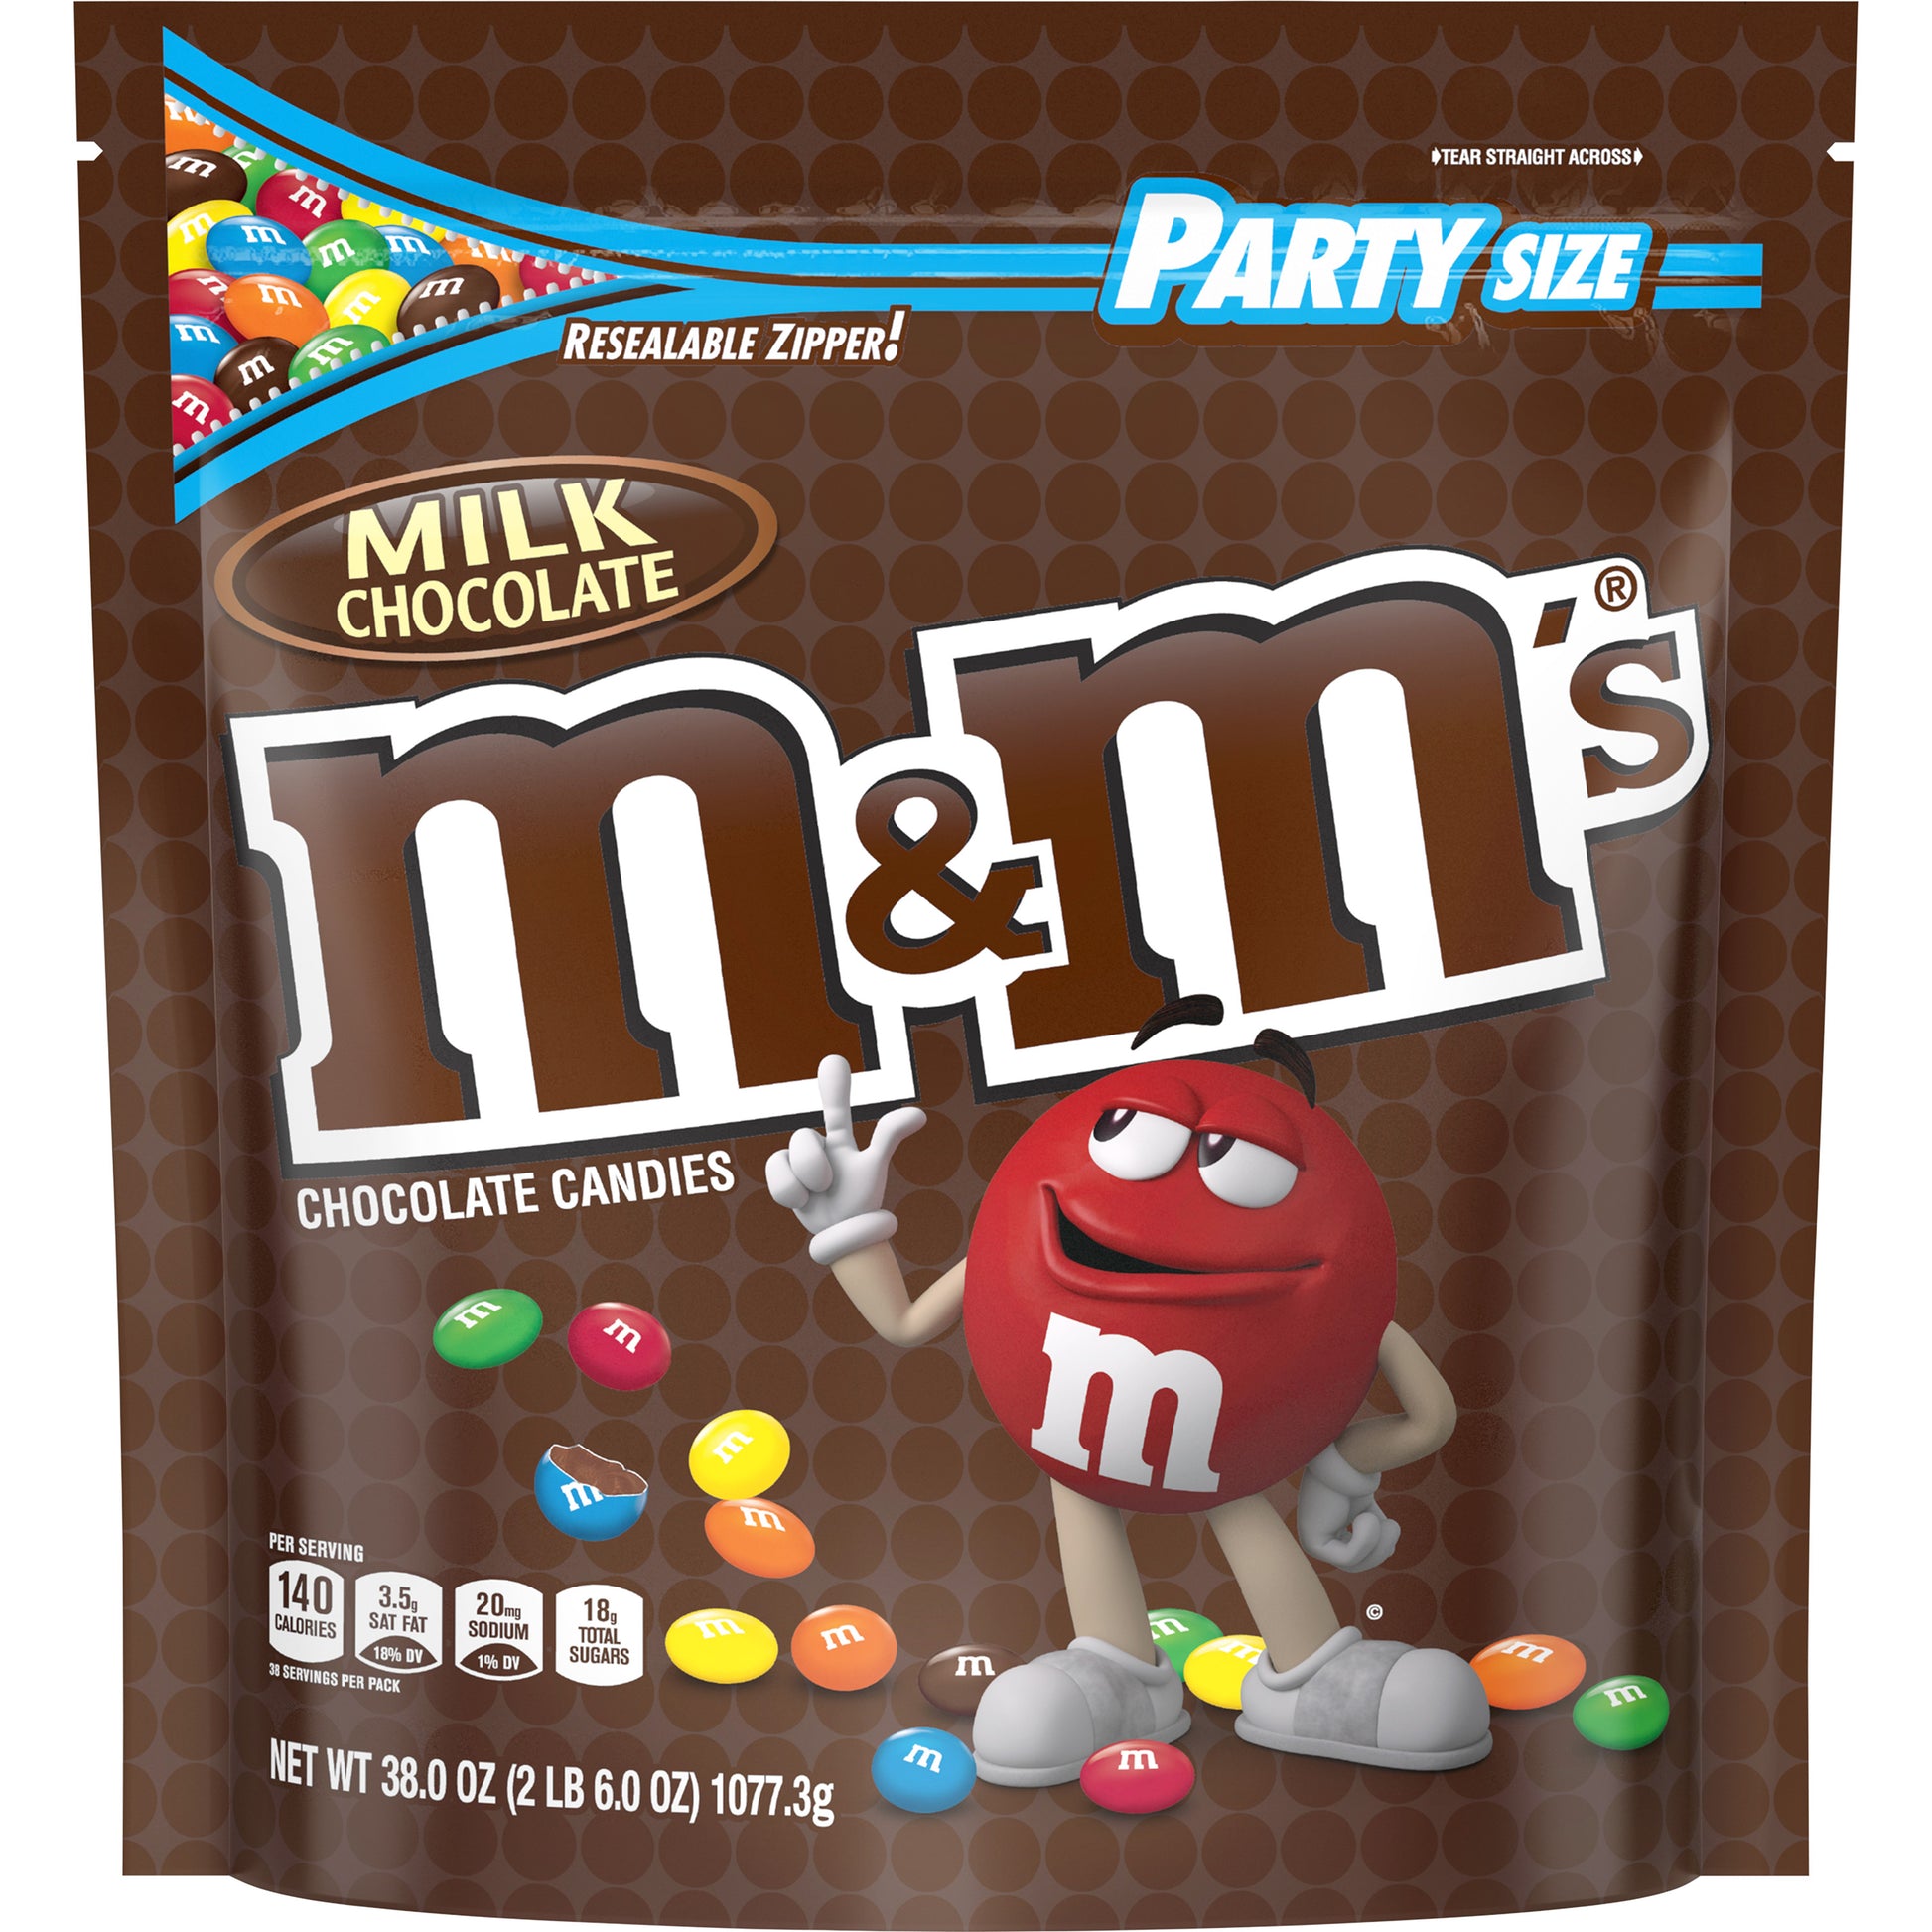 Buy Mini M&M's in Bulk at Low Prices Online Candy Store